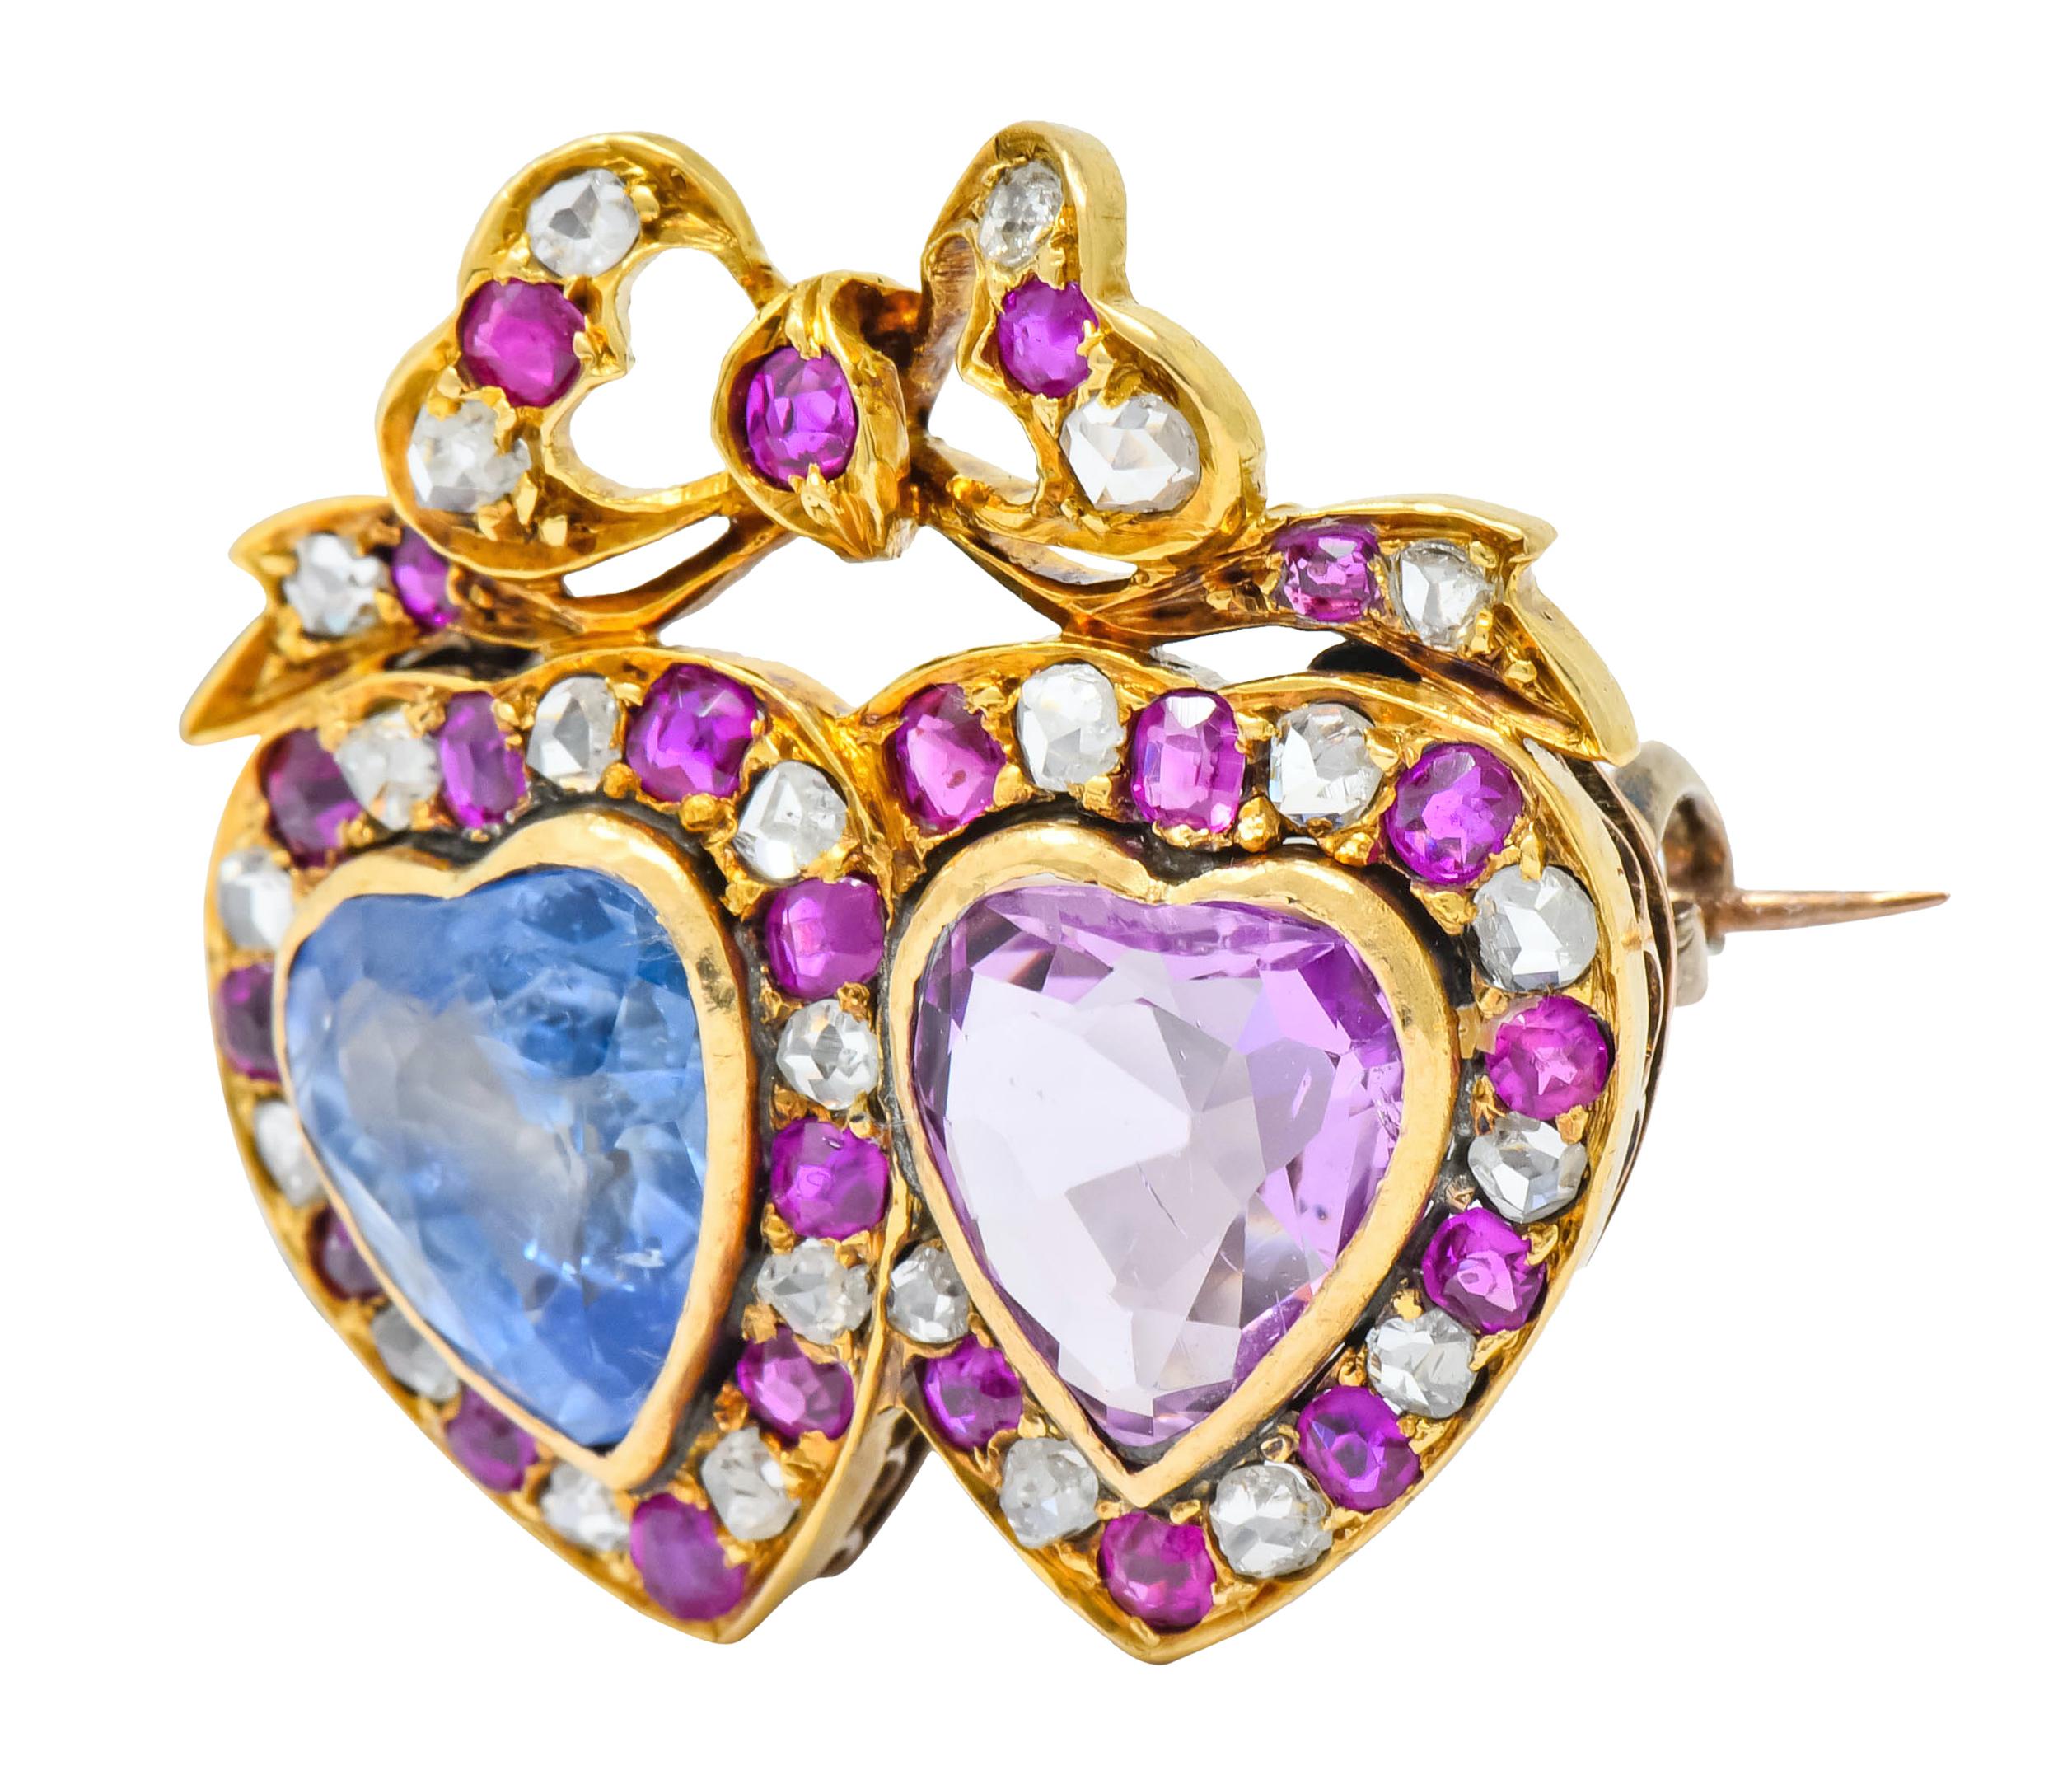 Brooch designed as two hearts topped with a bow motif

Each heart centering bezel set heart cut sapphire

One a powdery light blue, the second, a very-light bubble gum pink weighing approximately 6.50 carats total

Surrounded by round cut rubies